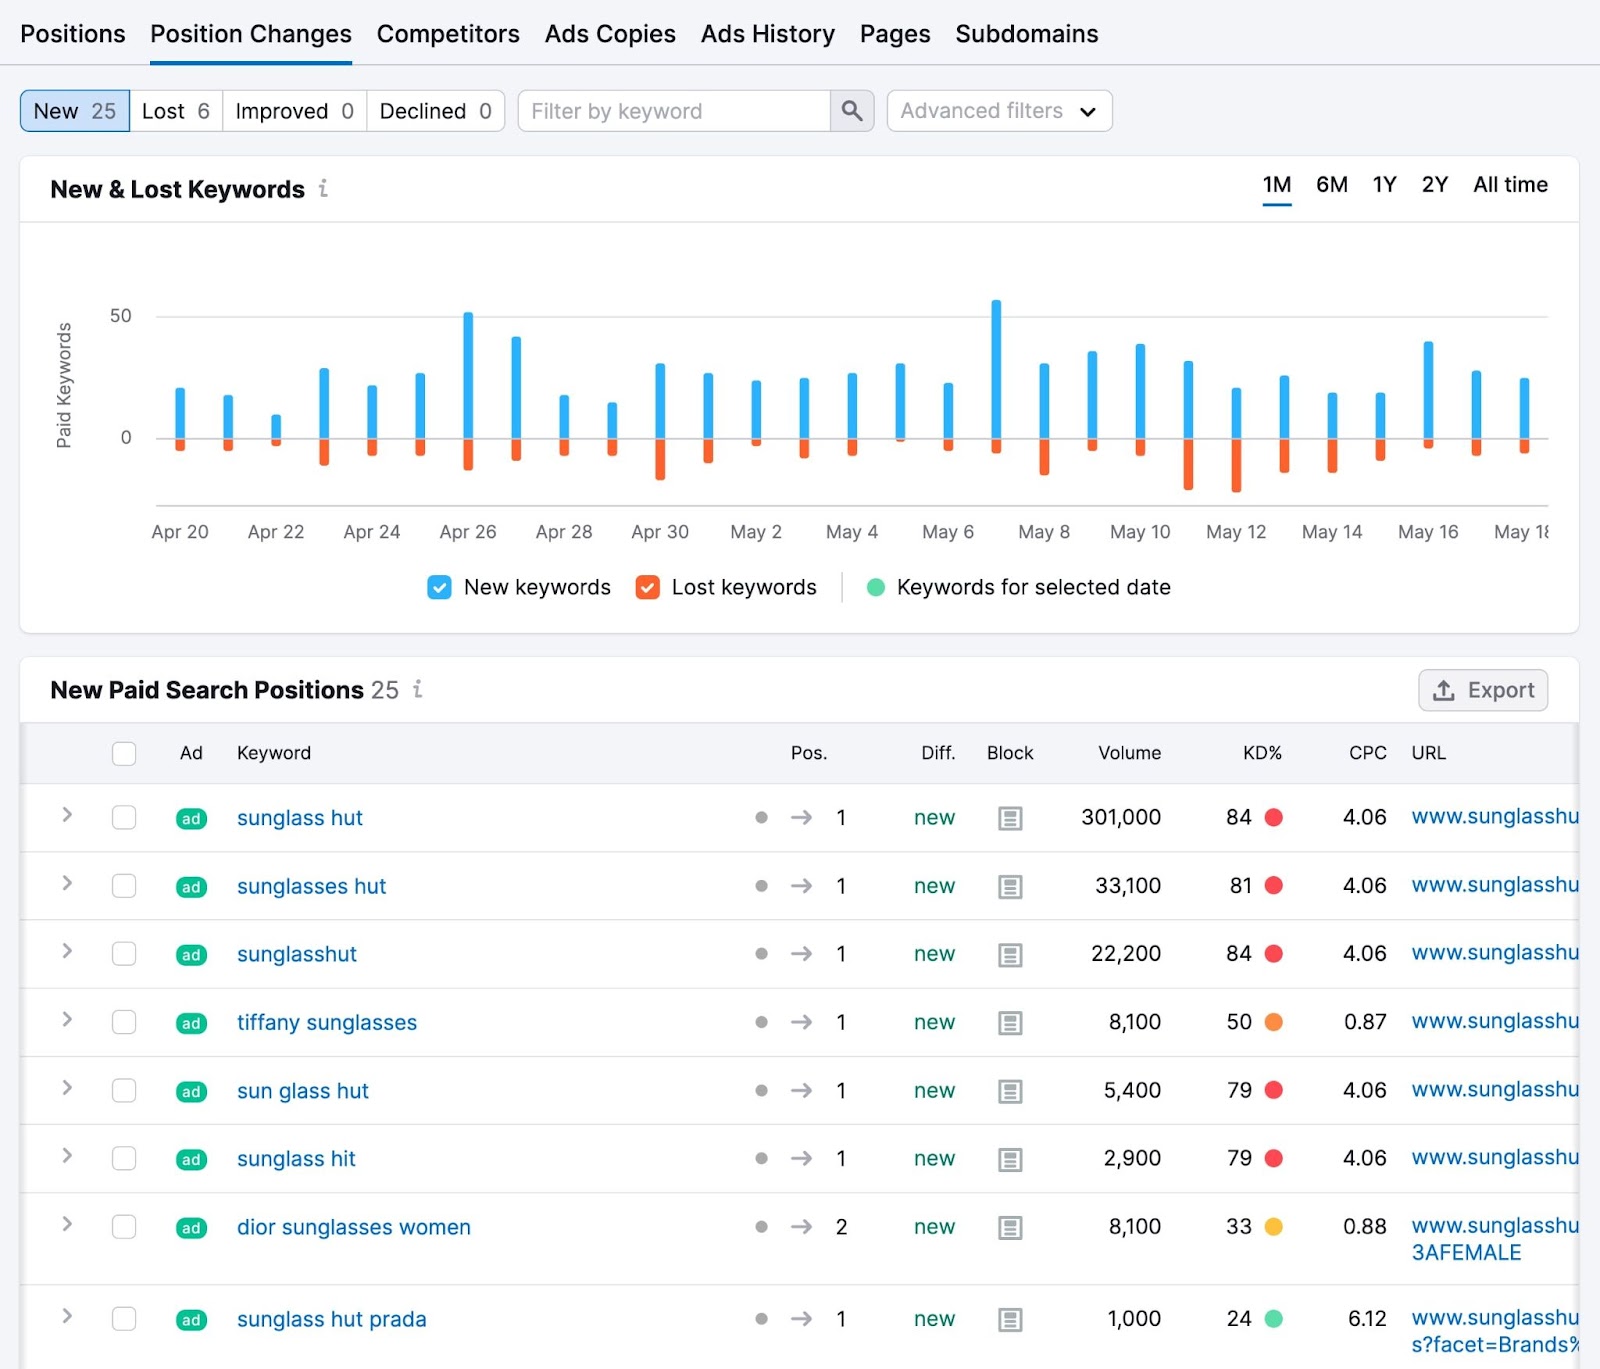 Semrush Advertising Research tool showing paid keyword search position changes